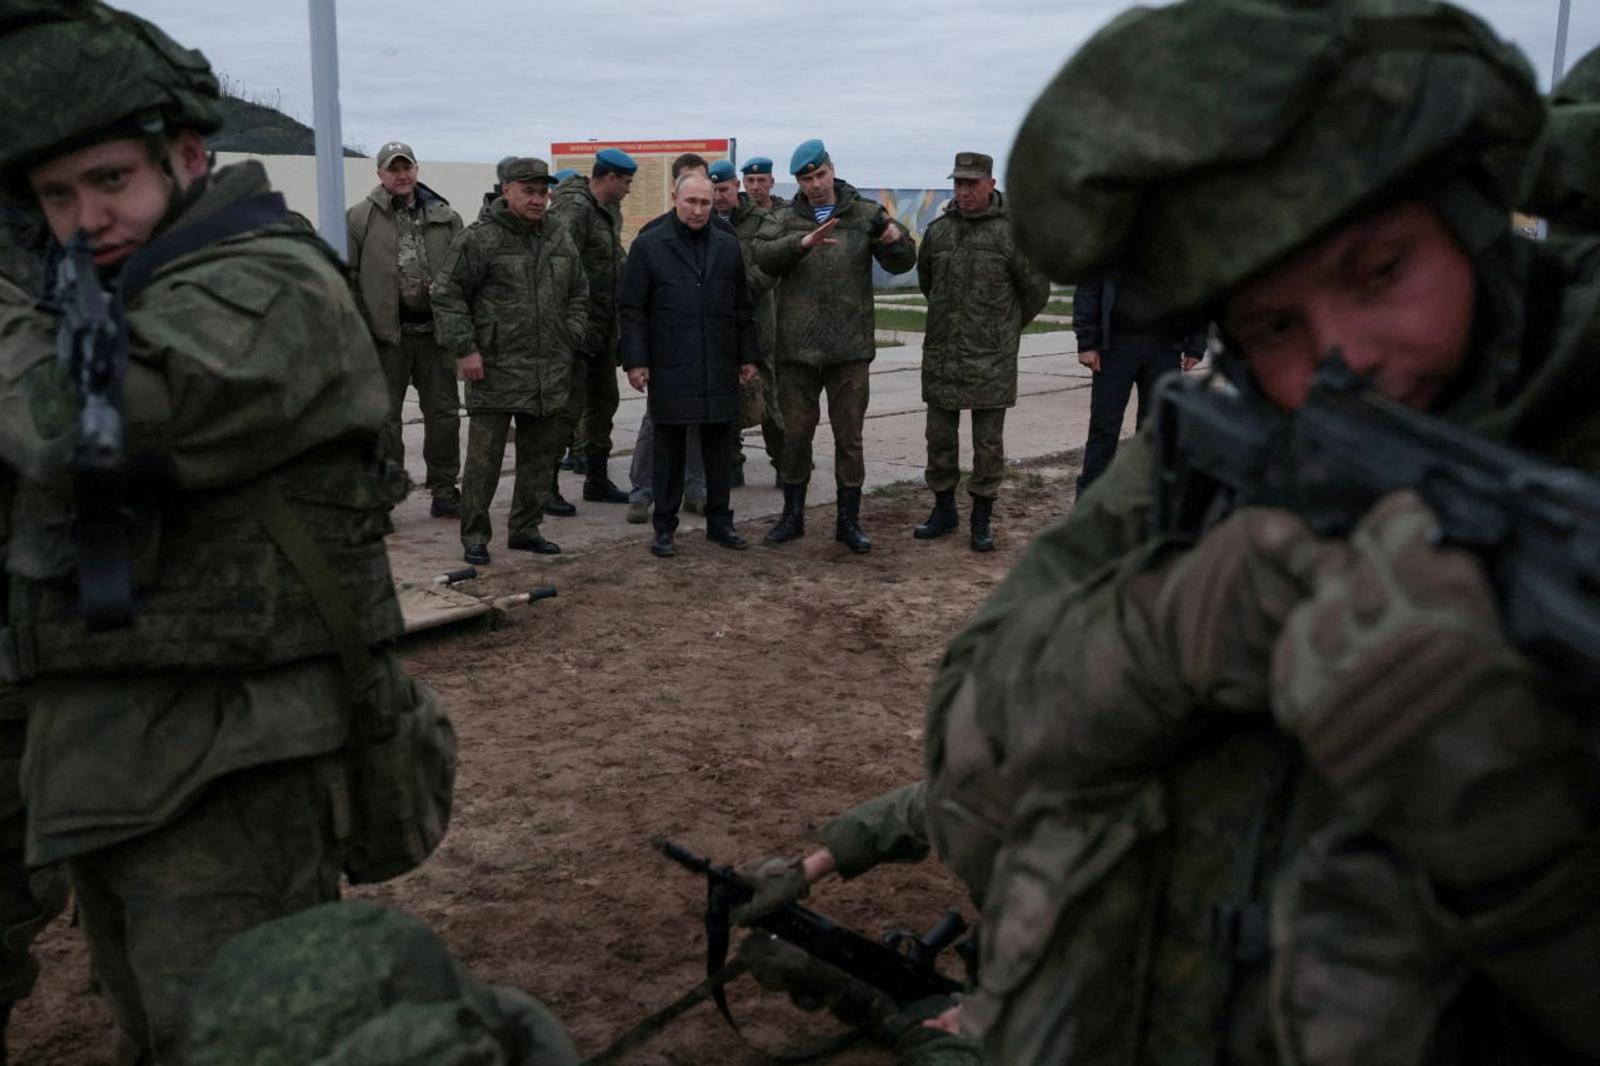 Russian President Vladimir Putin inspects preparations of mobilised reservists at a military training centre in Ryazan Region